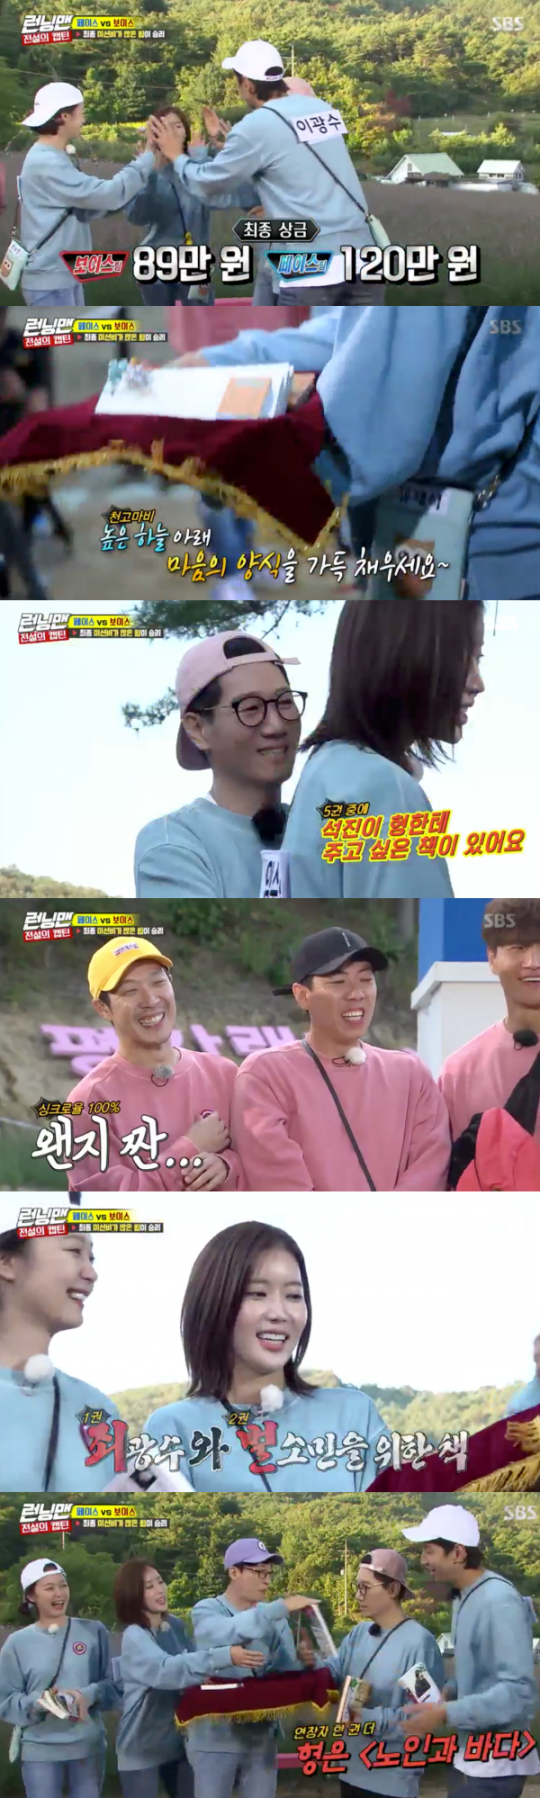 Lee Kwang-soo and Jeon So-min shared the first and second volumes of Dostoskis Sin and Punishment as the winning prizes on SBS Running Man.Running Man, which was broadcast on the 14th, was divided into a Babyface team and a voice team.The Babyface team, which includes Jeon So-min and Lee Kwang-soo, won the final prize money of 1.2 million won and won the voice team with 890,000 won.The winning Babyface team received a set of five masterpieces as a gift in the fall of the season of reading, and Yoo Jae-Suk first handed the last leaf to Ji Suk-jin.Lee Kwang-soo then quipped to Ji Suk-jin, Please do not fall.Lee Kwang-soo and Jeon So-min then divided the first and second volumes of Crime and Punishment.Yoo Jae-Suk got the Great Gatsby, Lim Su-hyang got my lime orange tree, and Ji Suk-jin finally got one more book, Old Man and the Sea.Running Man is broadcast every Sunday at 4:50 pm.